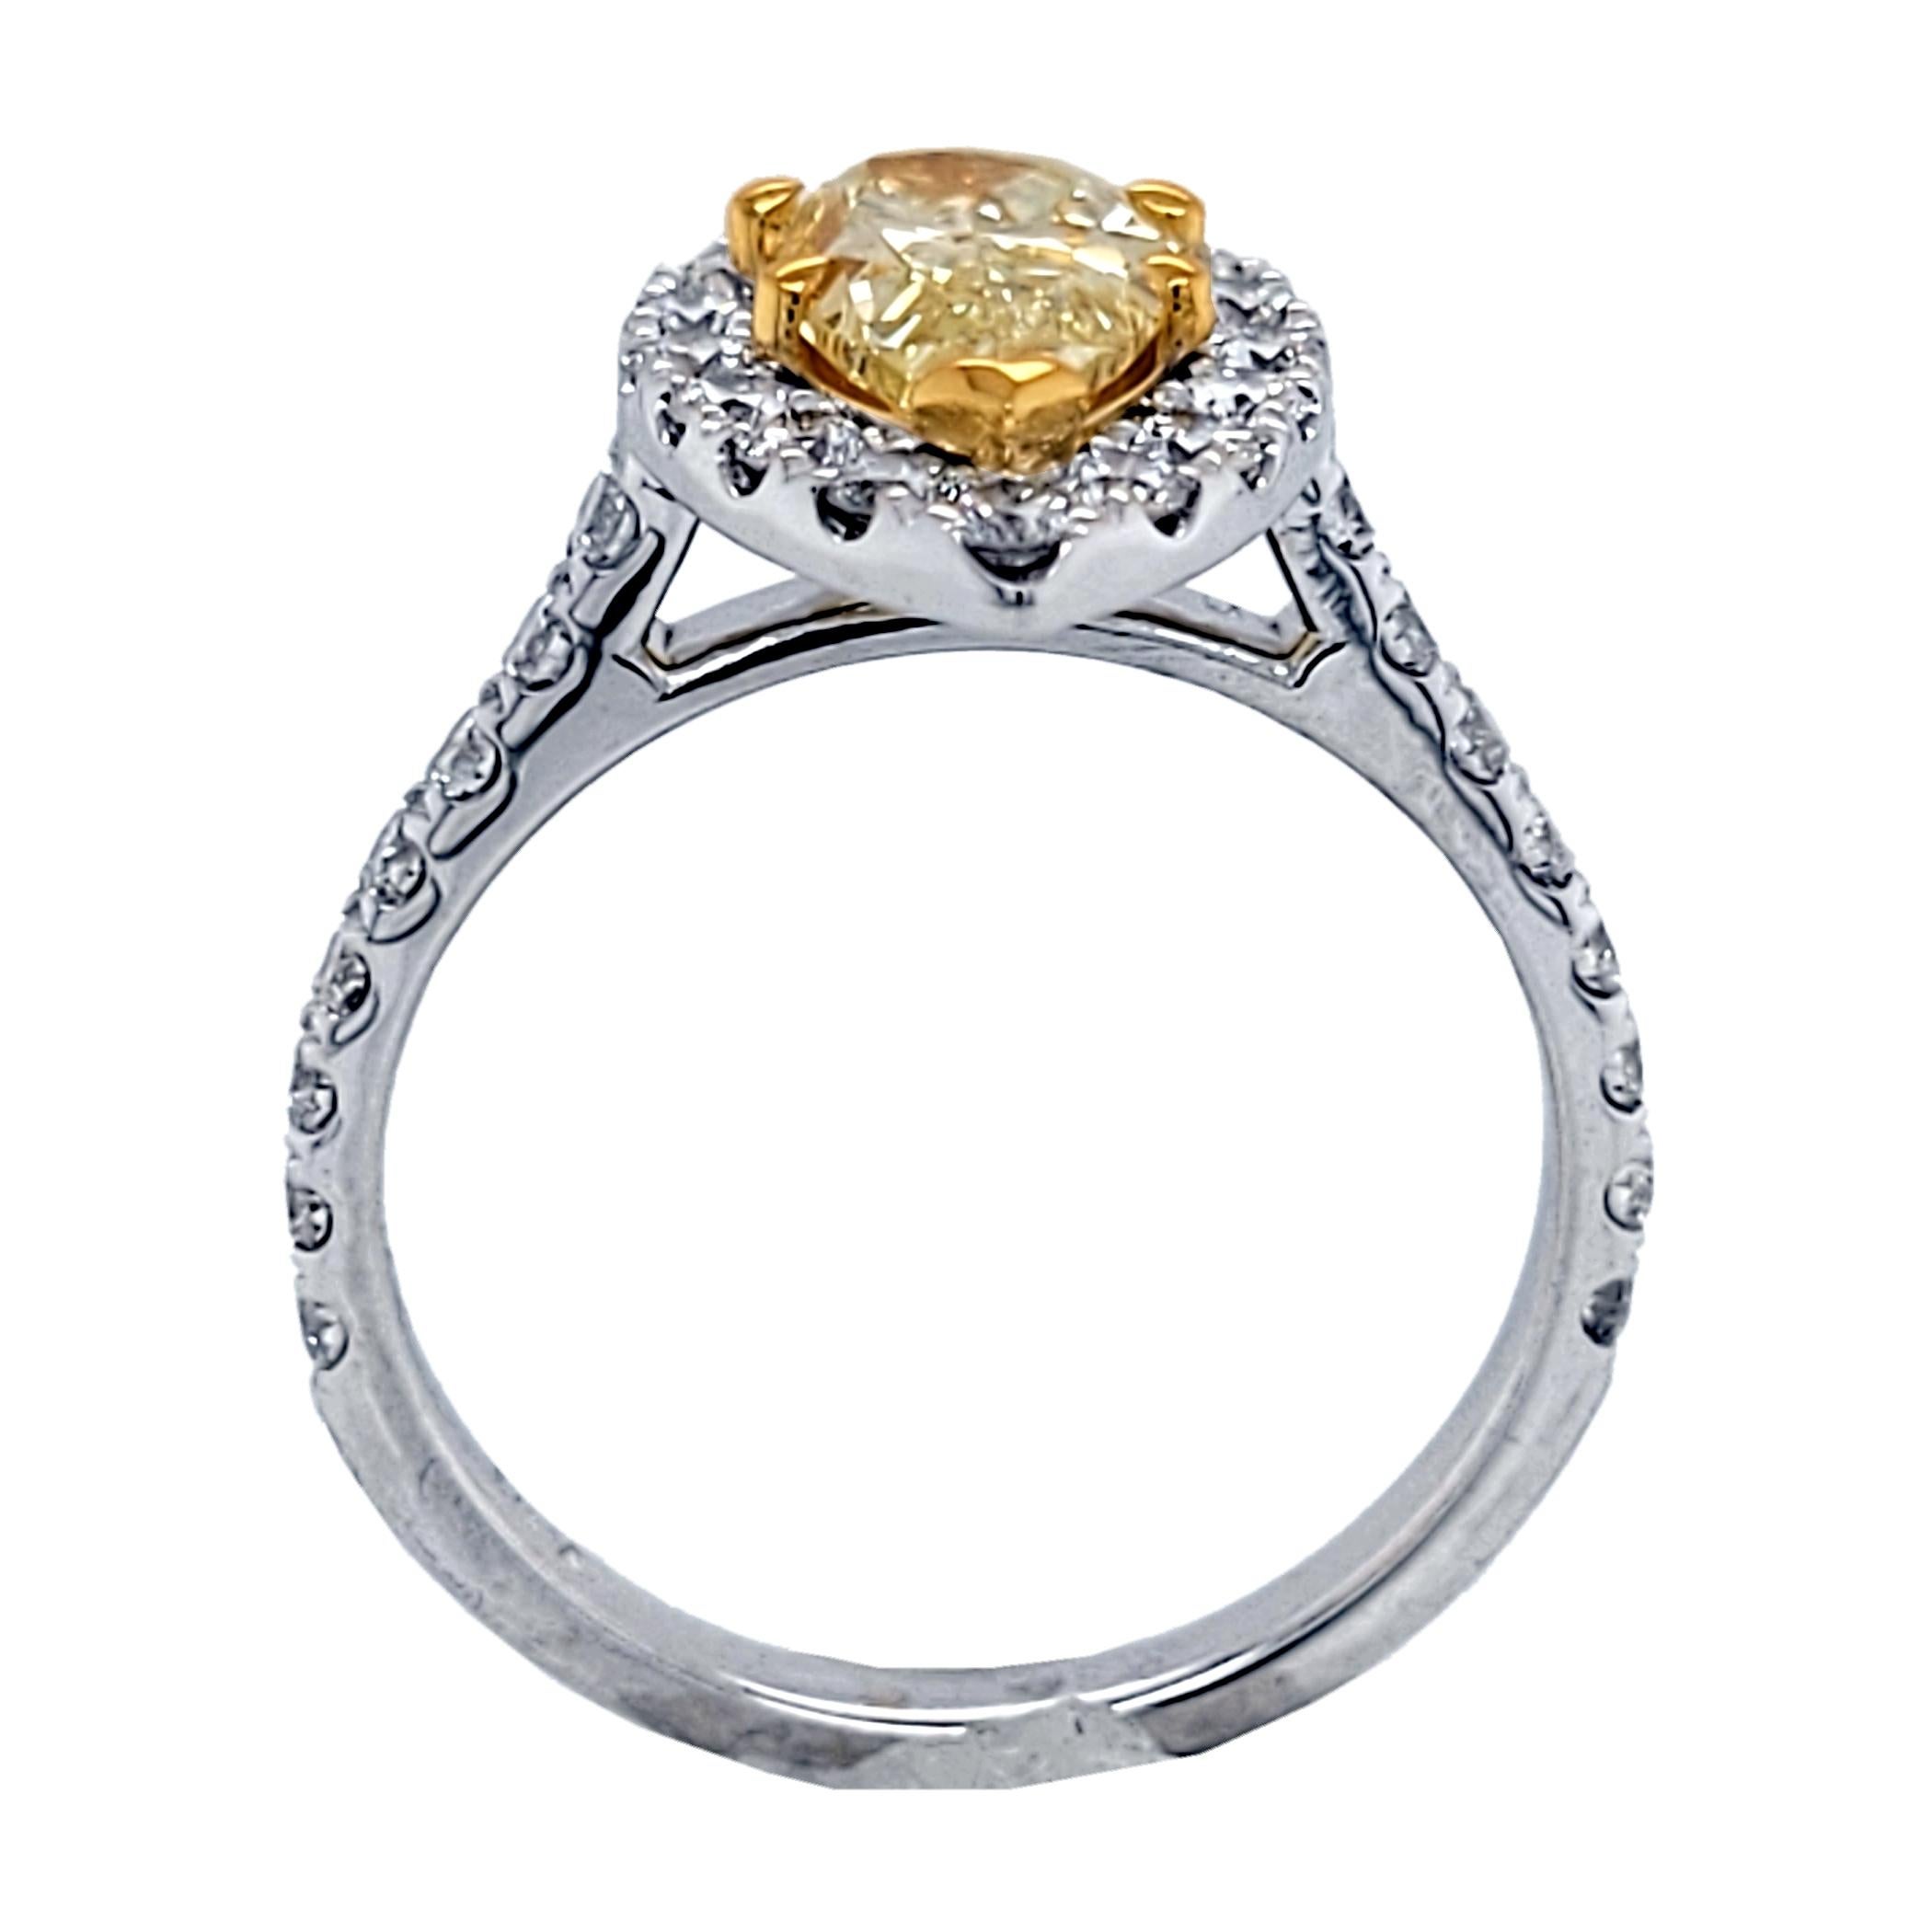 Contemporary GIA 1.20 Carat Fancy Light Yellow Pear Shaped 18 Karat Gold Ring with Halo For Sale